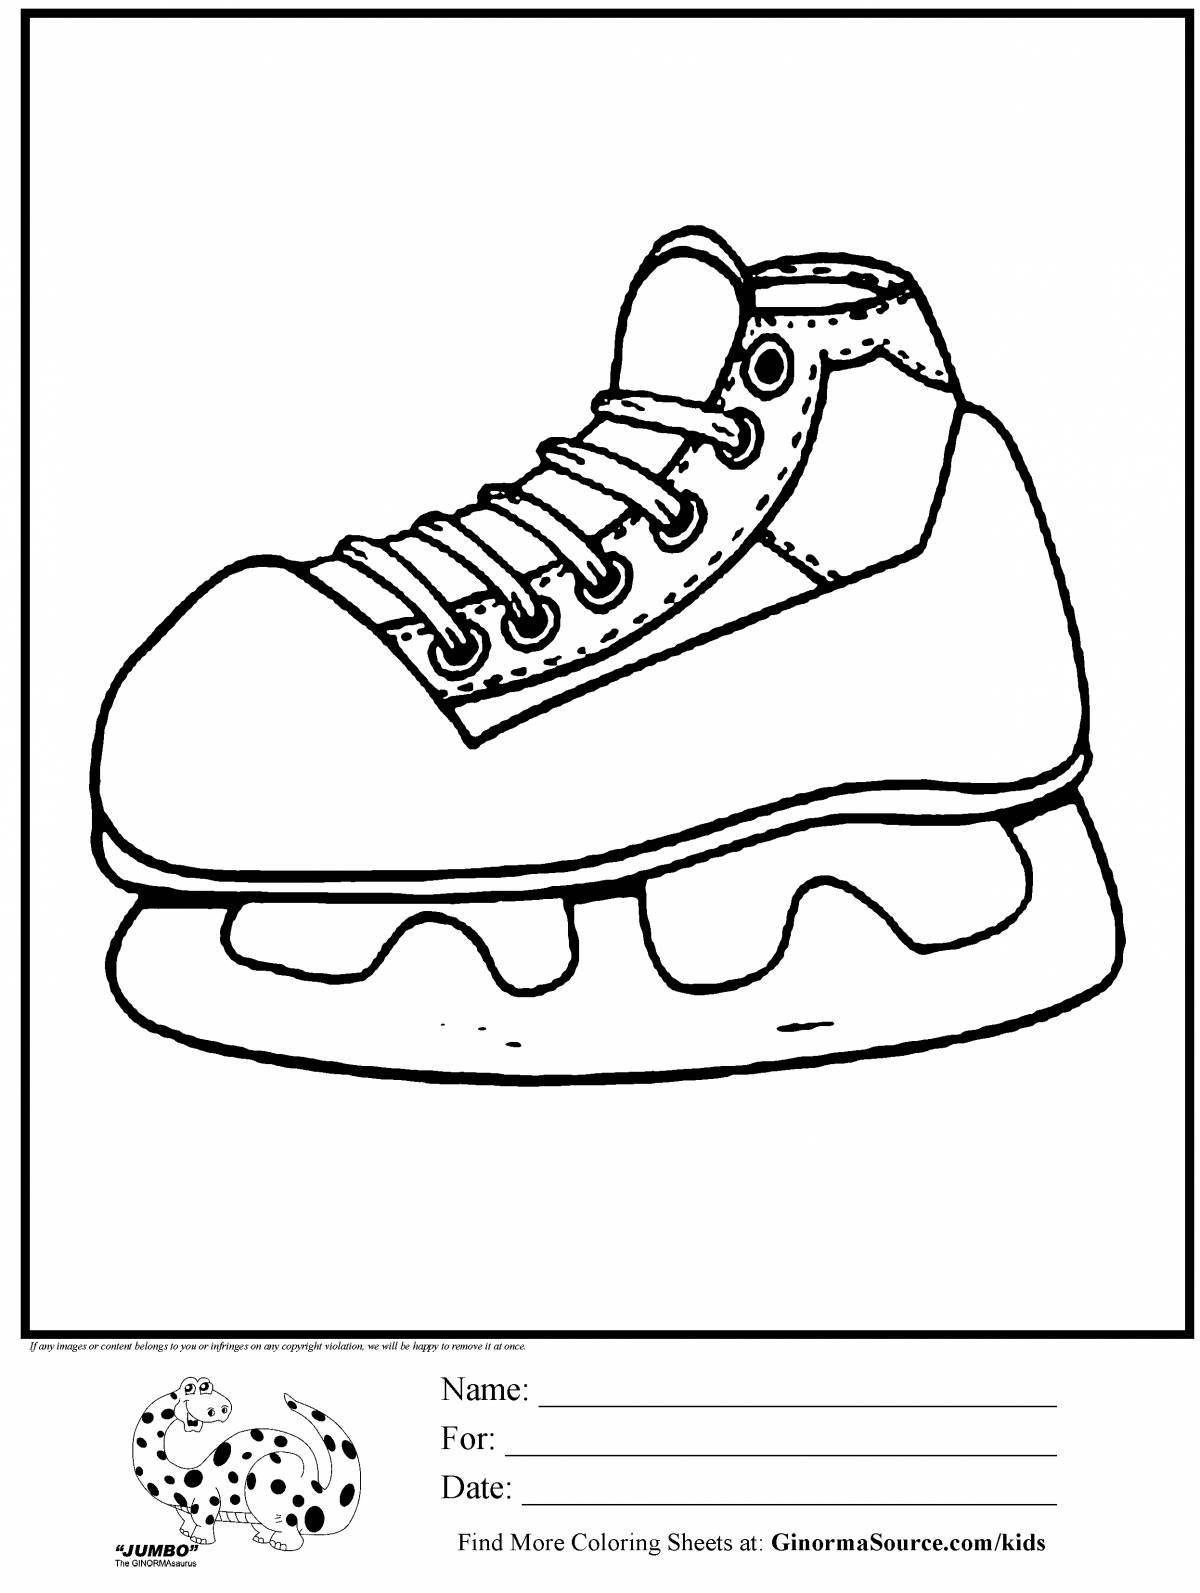 Coloring witty skate